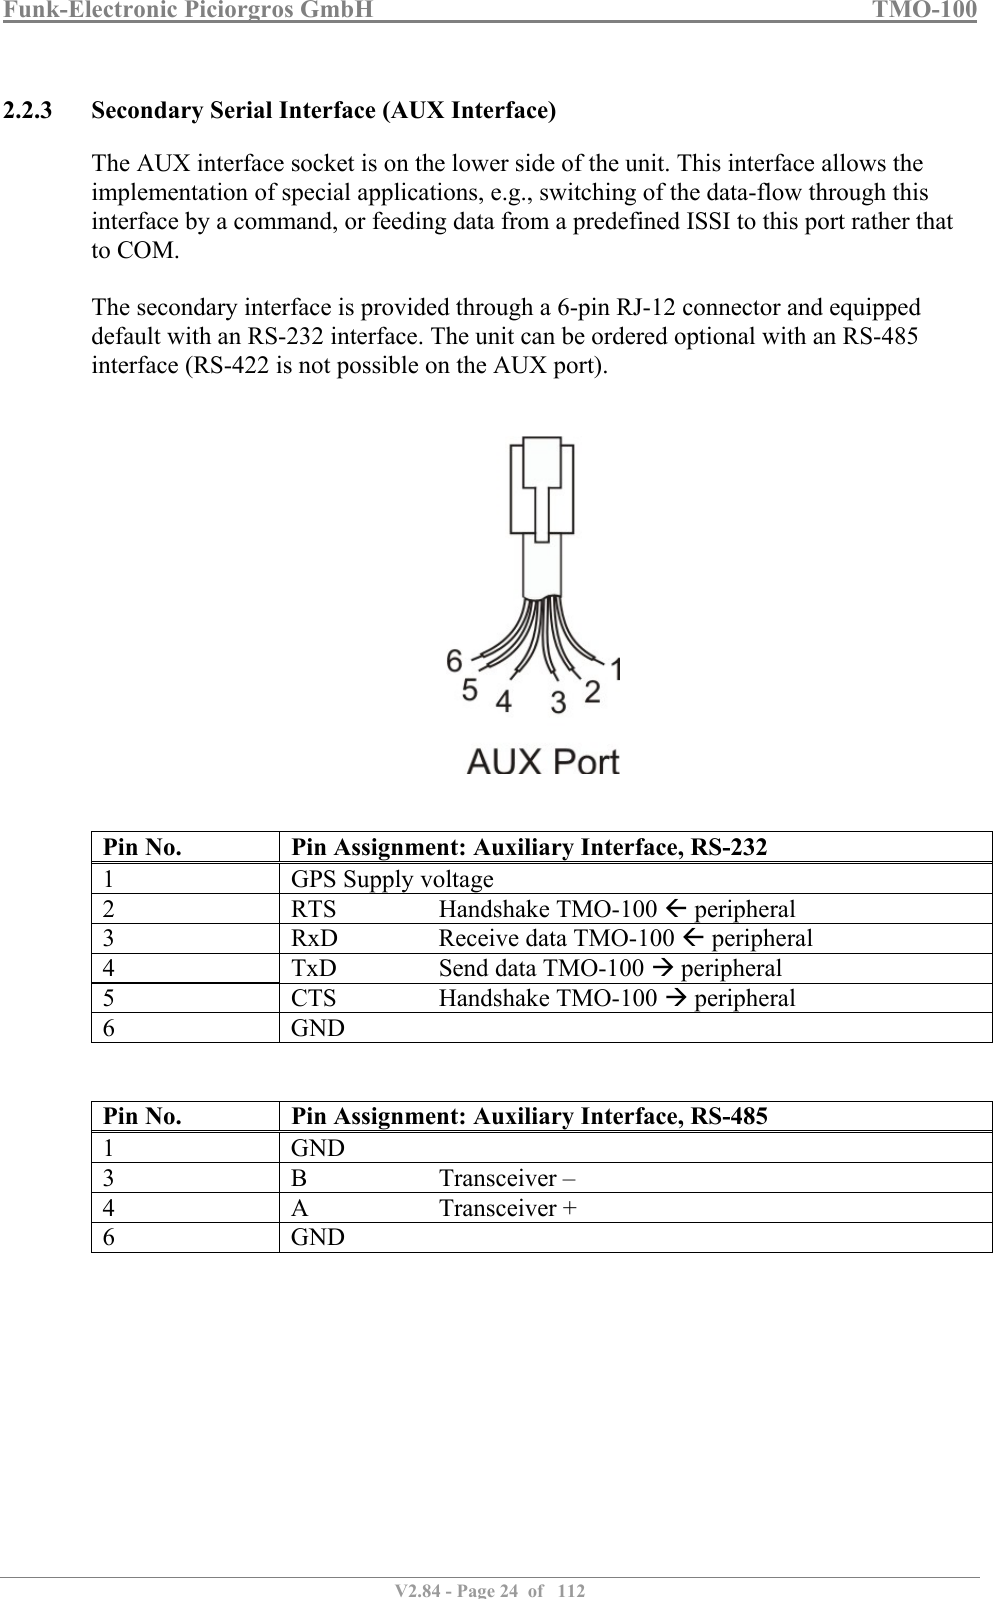 Funk-Electronic Piciorgros GmbH   TMO-100   V2.84 - Page 24  of   112   2.2.3 Secondary Serial Interface (AUX Interface) The AUX interface socket is on the lower side of the unit. This interface allows the implementation of special applications, e.g., switching of the data-flow through this interface by a command, or feeding data from a predefined ISSI to this port rather that to COM.  The secondary interface is provided through a 6-pin RJ-12 connector and equipped default with an RS-232 interface. The unit can be ordered optional with an RS-485 interface (RS-422 is not possible on the AUX port).      Pin No.  Pin Assignment: Auxiliary Interface, RS-232 1  GPS Supply voltage 2  RTS    Handshake TMO-100  peripheral 3  RxD    Receive data TMO-100  peripheral 4  TxD    Send data TMO-100  peripheral 5  CTS    Handshake TMO-100  peripheral 6  GND   Pin No.  Pin Assignment: Auxiliary Interface, RS-485 1  GND 3  B    Transceiver – 4  A    Transceiver + 6  GND  